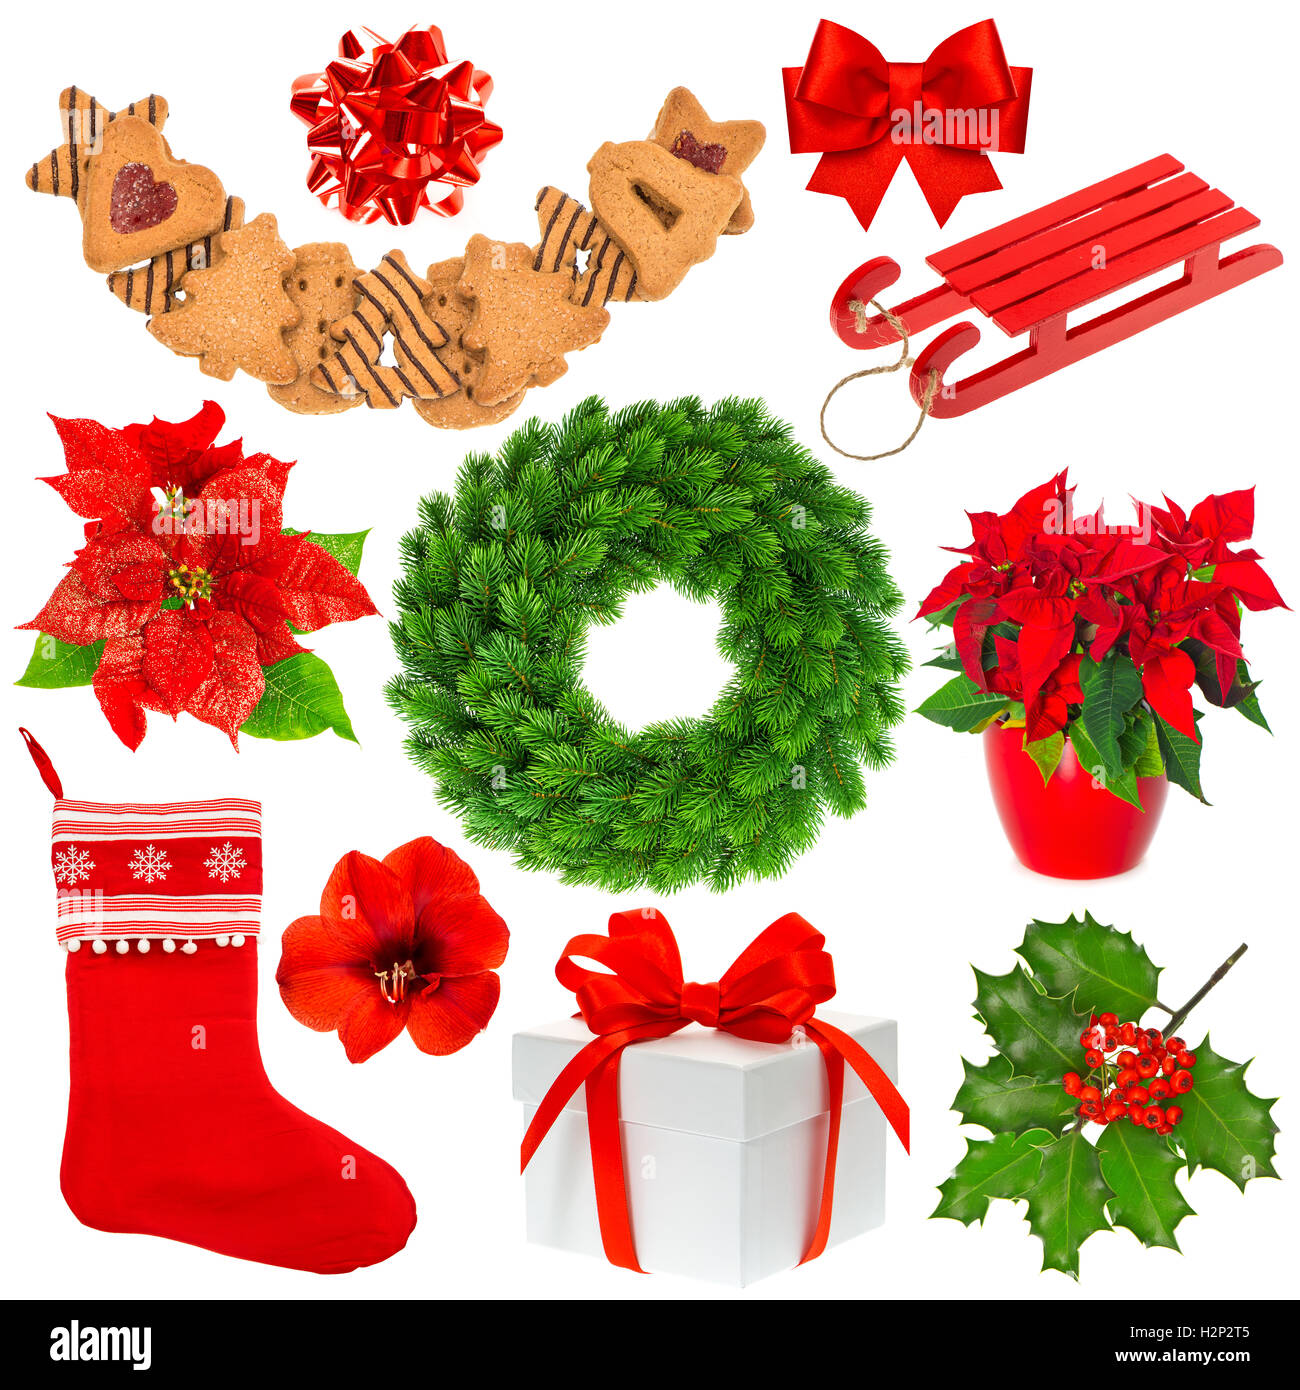 Christmas collection isolated on white background. Stocking, gifts, wreath, cookies Stock Photo